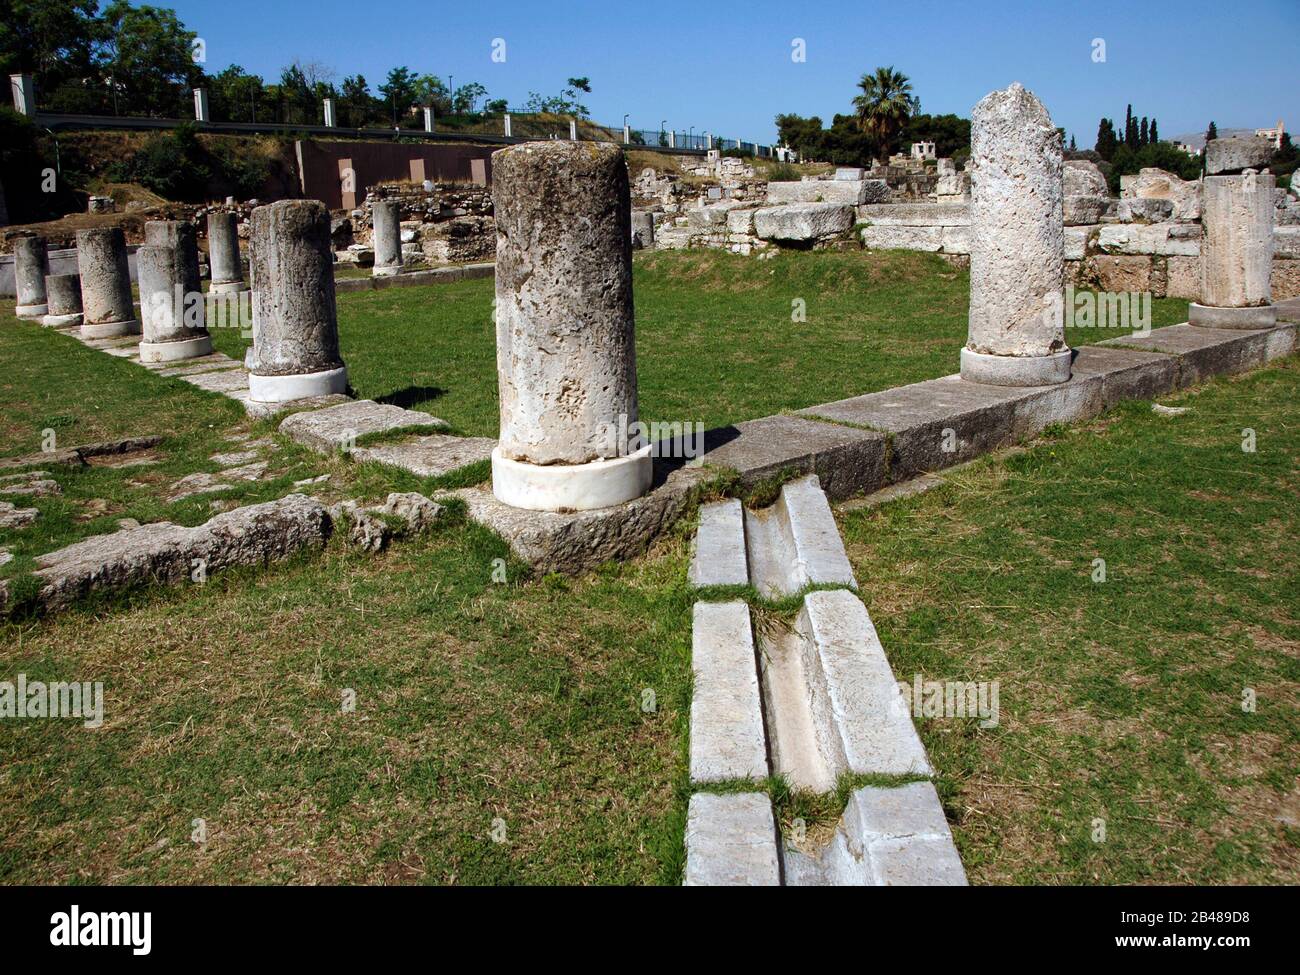 Greece, Athens. Area of Kerameikos (Ceramicus). Its name derives from 'potter's quarter'. Northwest of the Acropolis. View of the Pompeion, the public classical building, 4th century BC, where the sacral items used at the Panathenaic procession were kept. Stock Photo